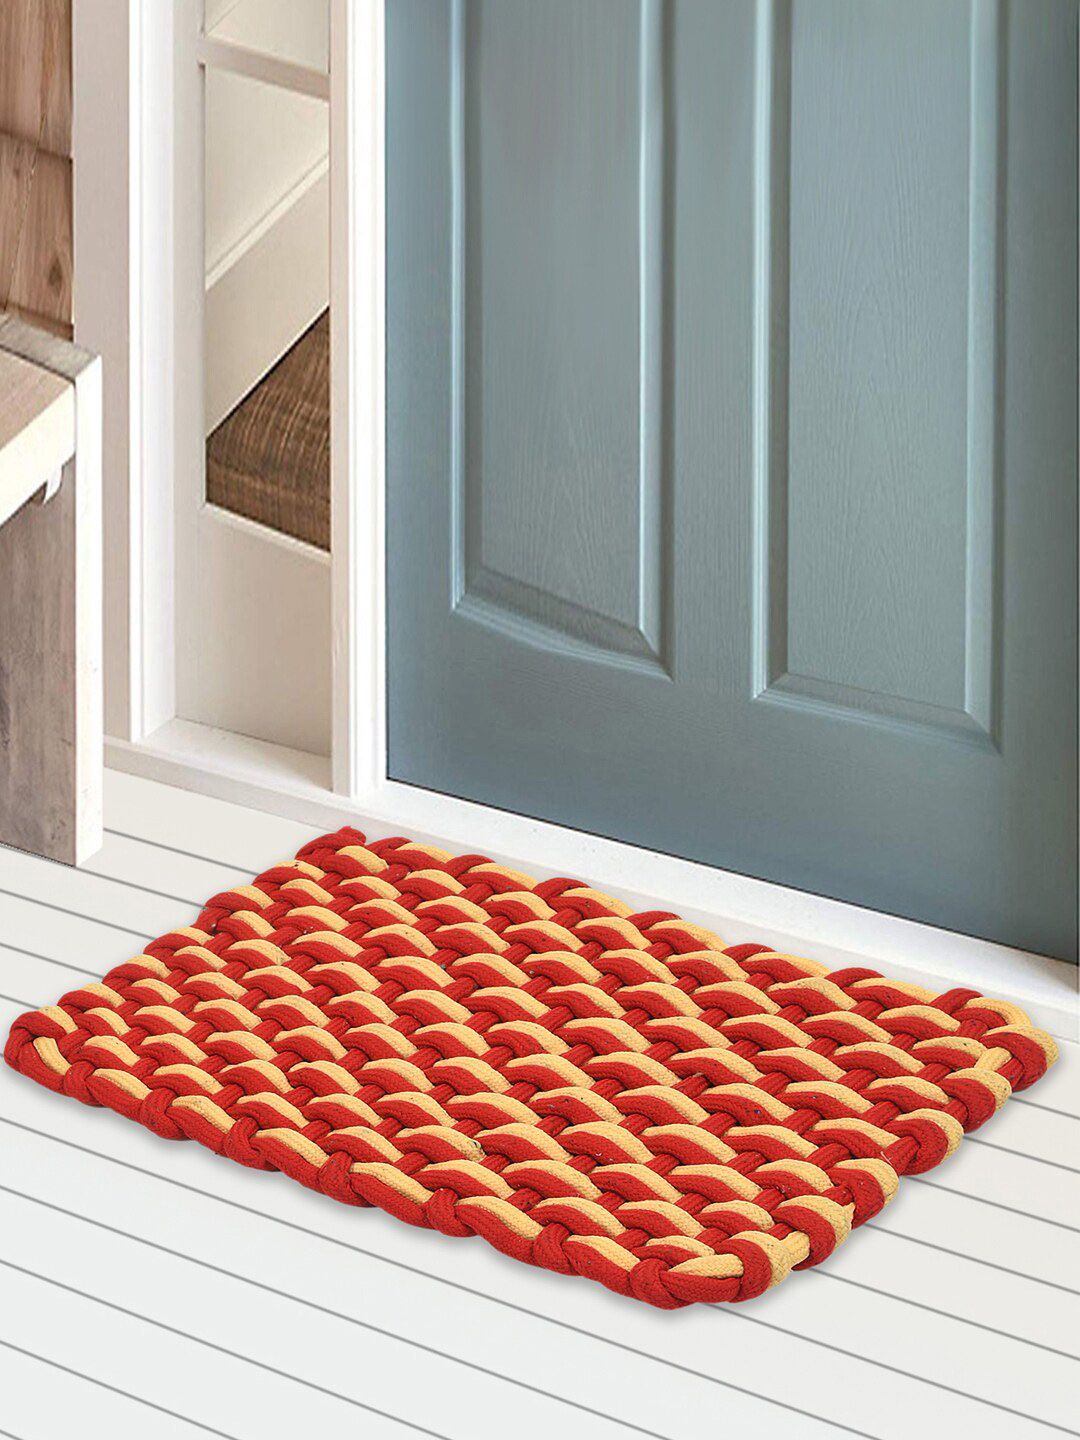 Kuber Industries Pack of 4 Red & Beige Striped Anti-Skid Cotton Doormats Price in India